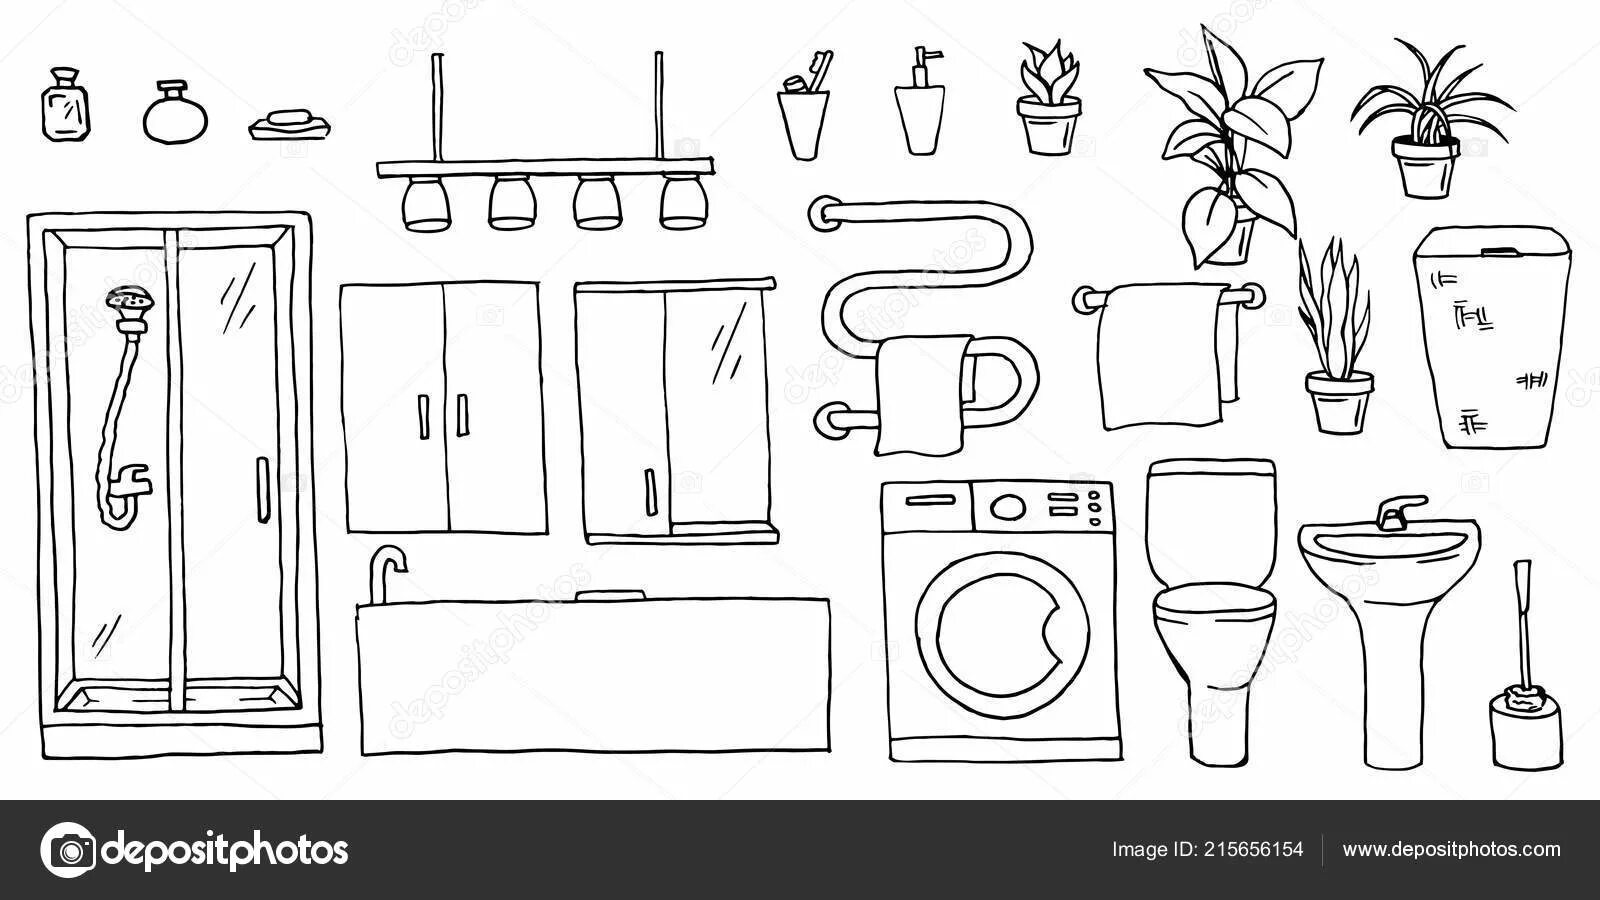 Inspirational toilet coloring page on the current side